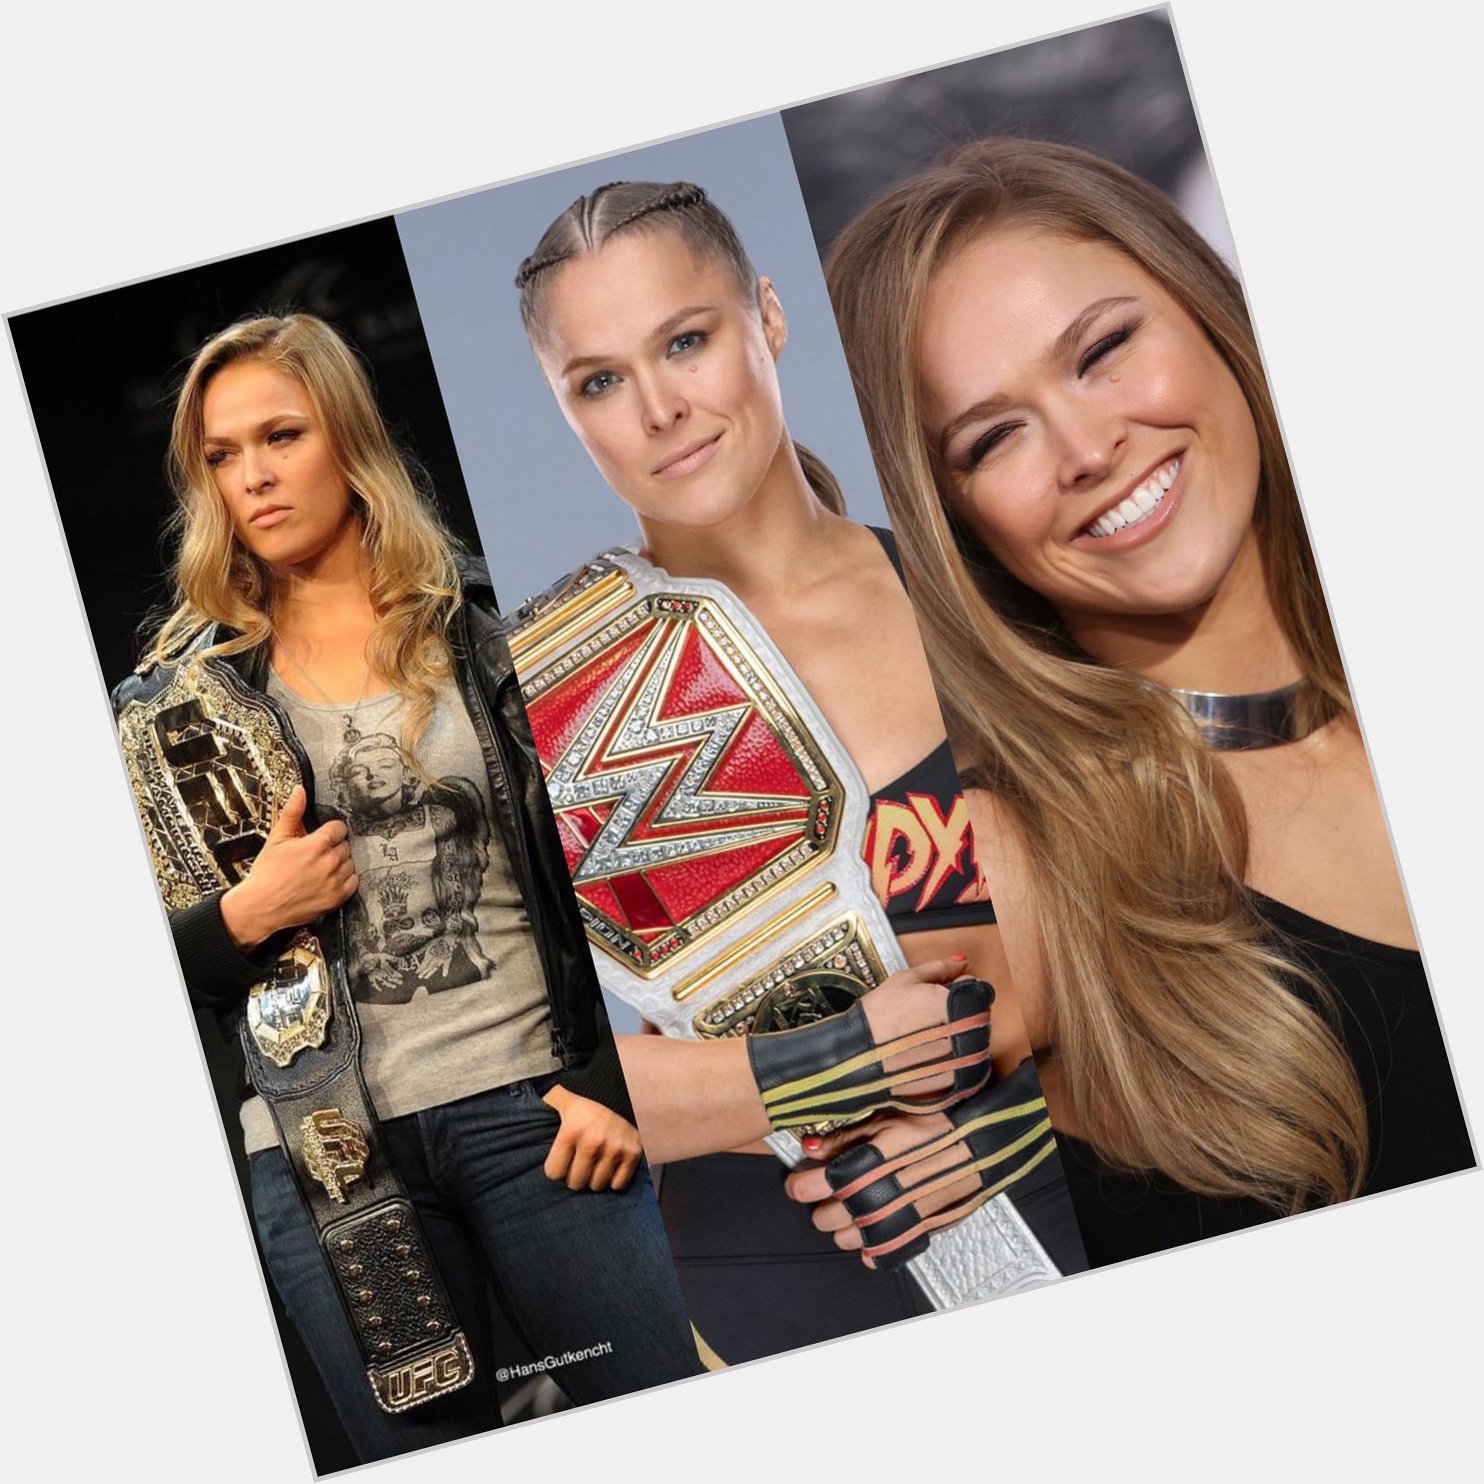 Happy Birthday to the Baddest Woman on the Planet Ronda Rousey! 